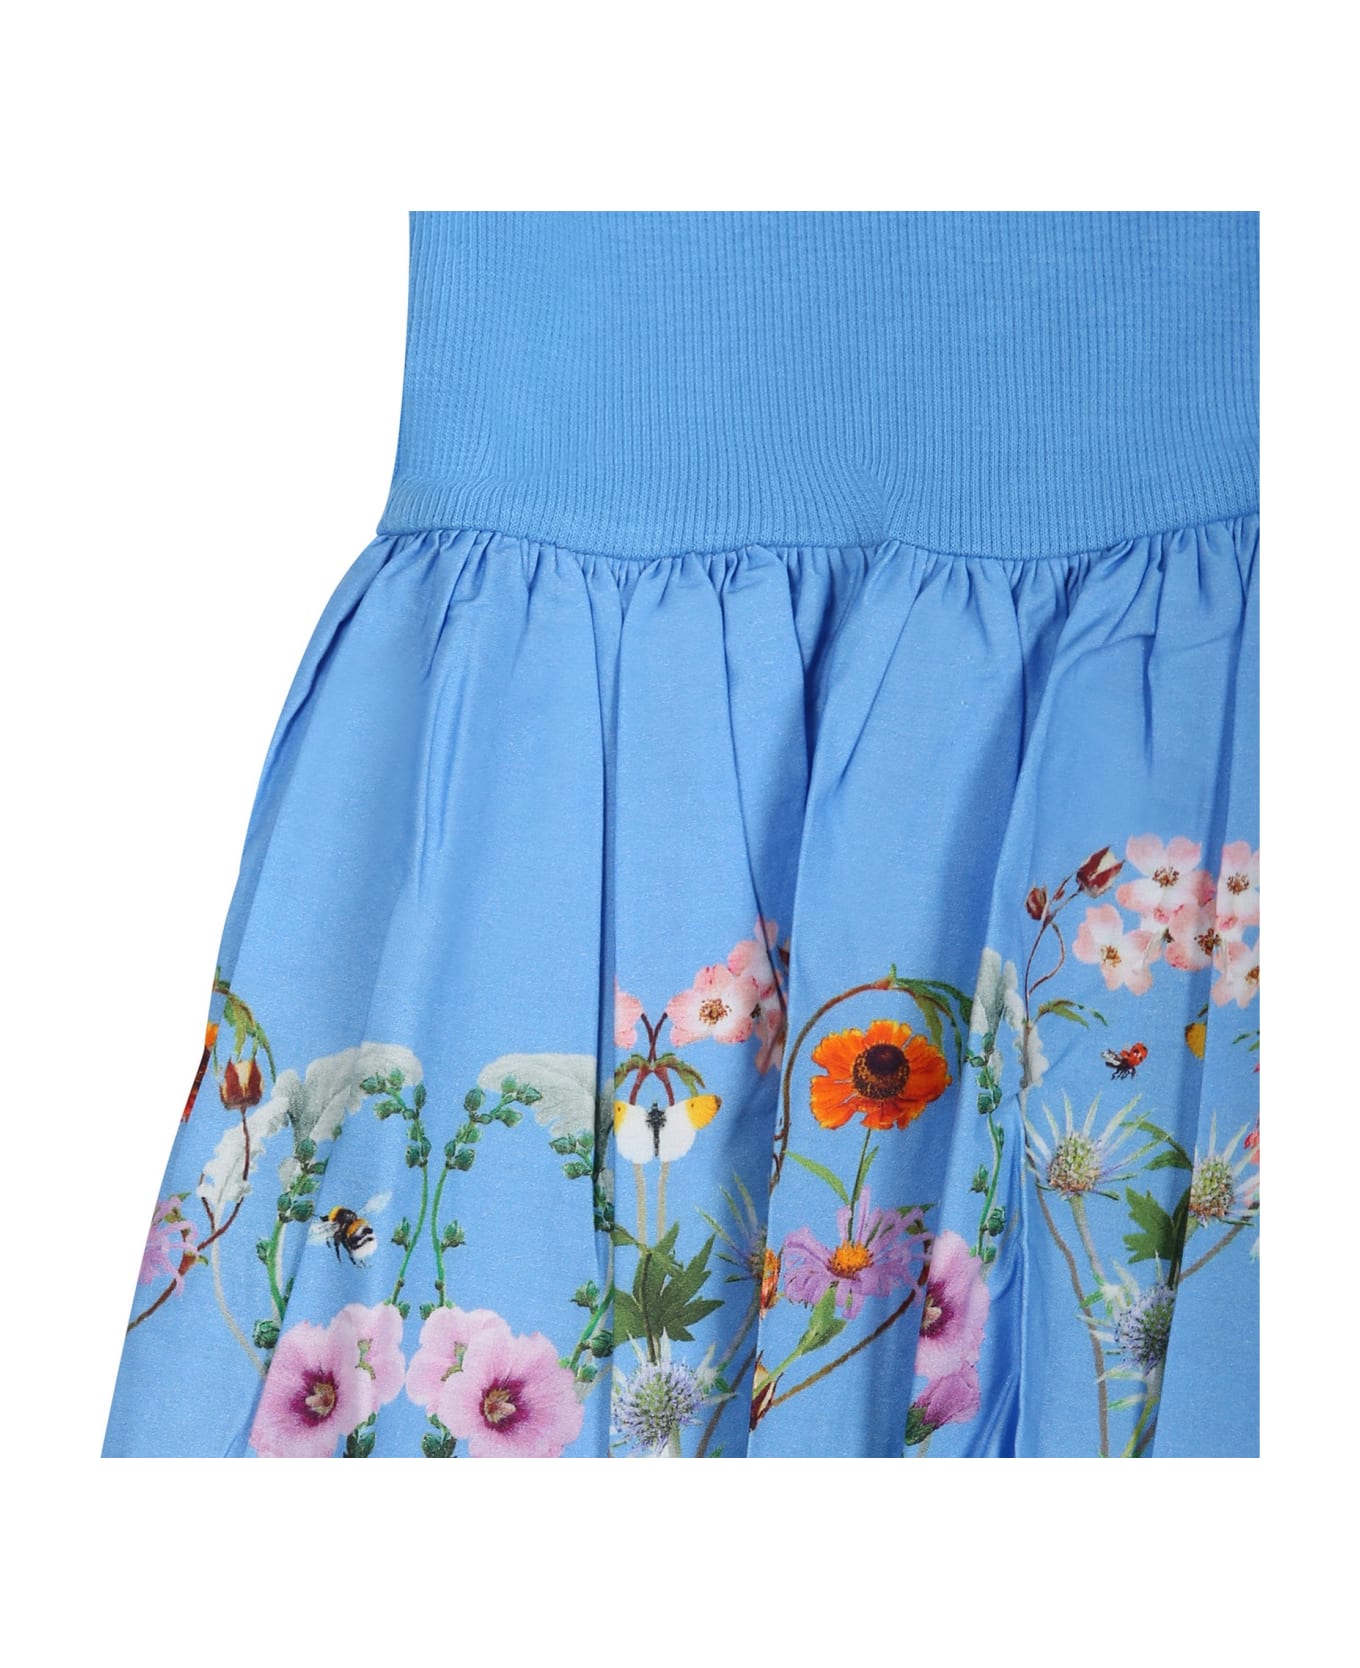 Molo Light Blue Casual Carin Dress For Baby Girl With A Floral Pattern - Light Blue